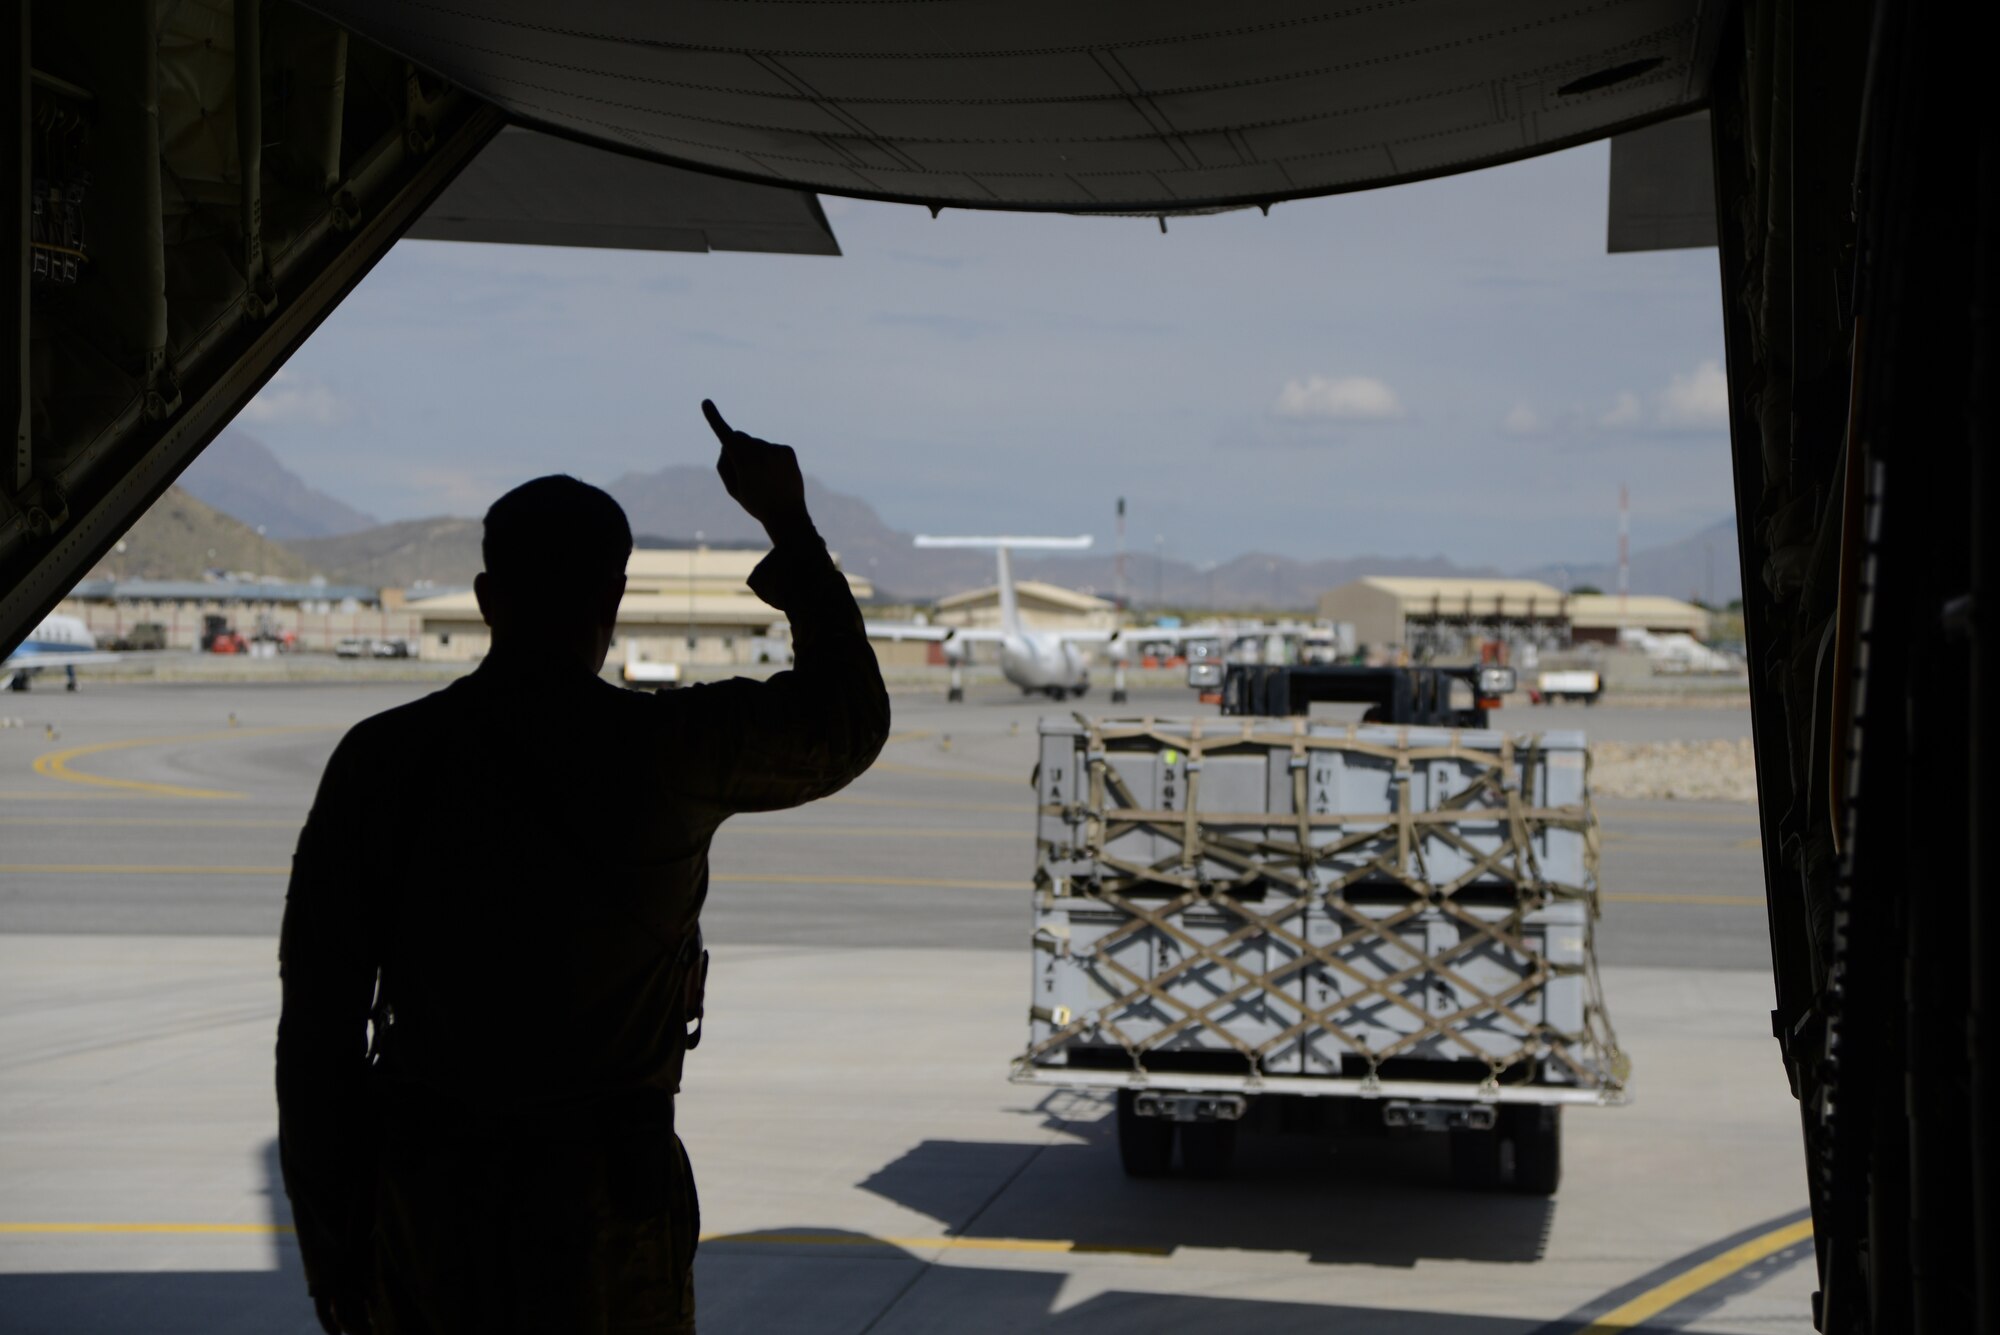 KABUL INTERNATIONAL AIRPORT, Afghanistan - U.S. Air Force Tech. Sgt. Thomas Baker, a loadmaster assigned to the 774th Expeditionary Airlift Squadron, 455th Air Expeditionary Wing signals a forklift driver as supplies are loaded onto a C-130 J-30 at Kabul International Airport May 5, 2014. Coalition Forces joined together to assist the Afghan Government with relief efforts after a recent mudslide in Badakhshan province. (U.S. Air Force photo by Master Sgt. Cohen A. Young)